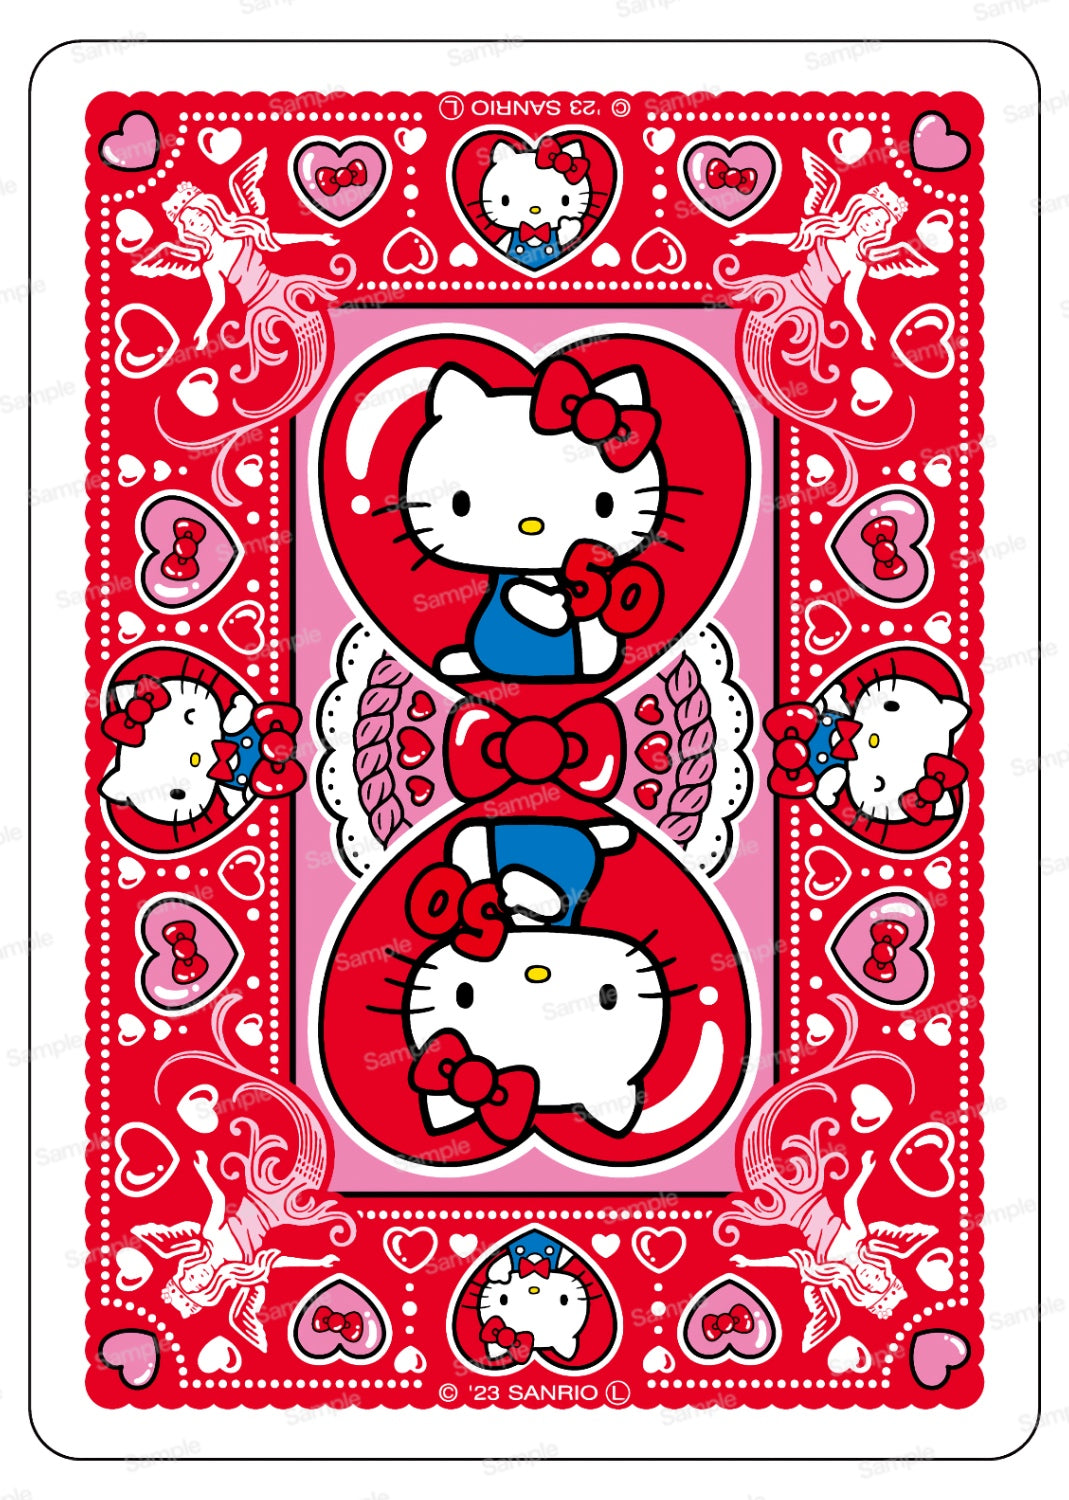 Bicycle Hello Kitty 50th Anniversary Red Playing Cards Sanrio